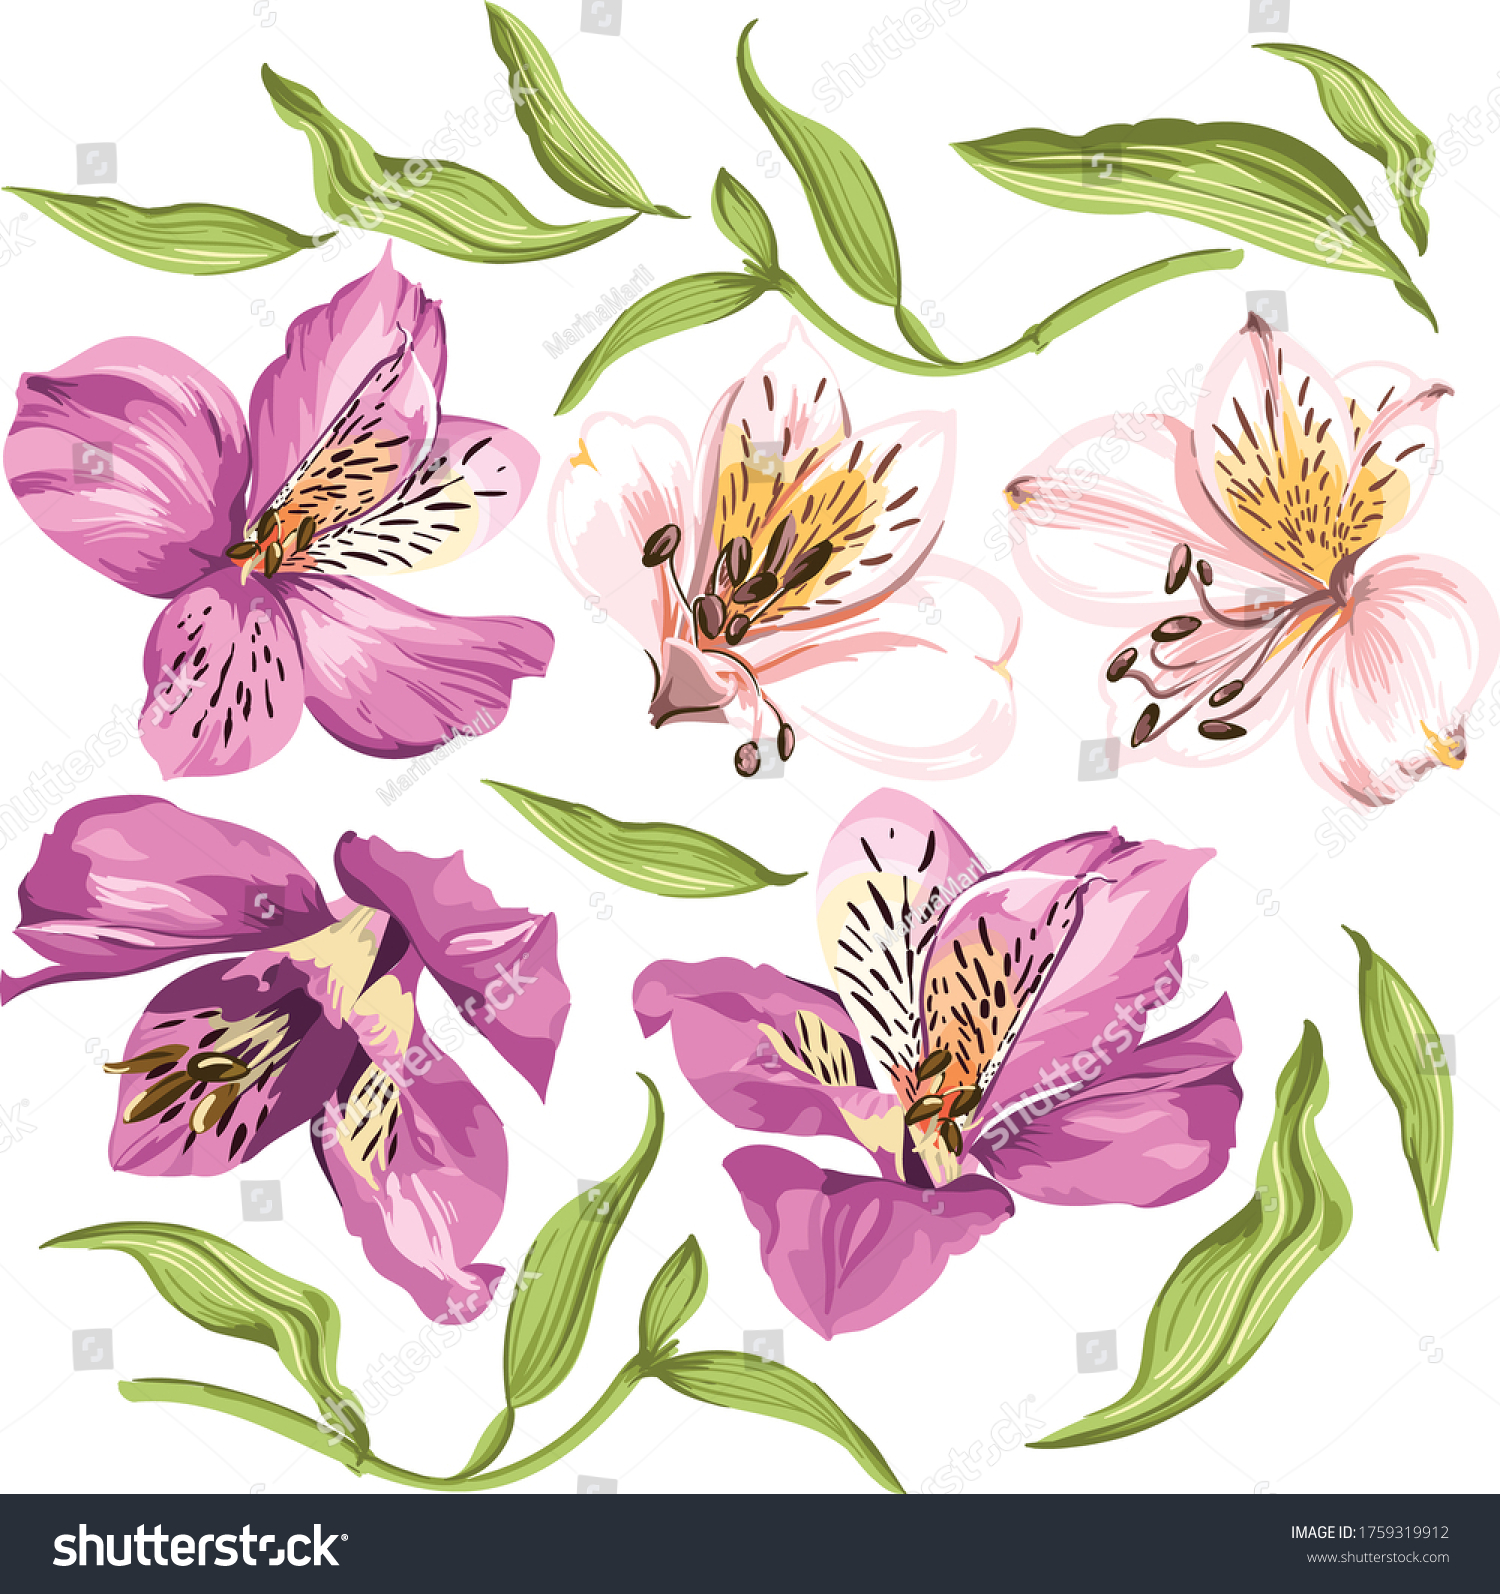 Vector Alstroemeria flowers in pink shades, isolated buds with leaves #1759319912